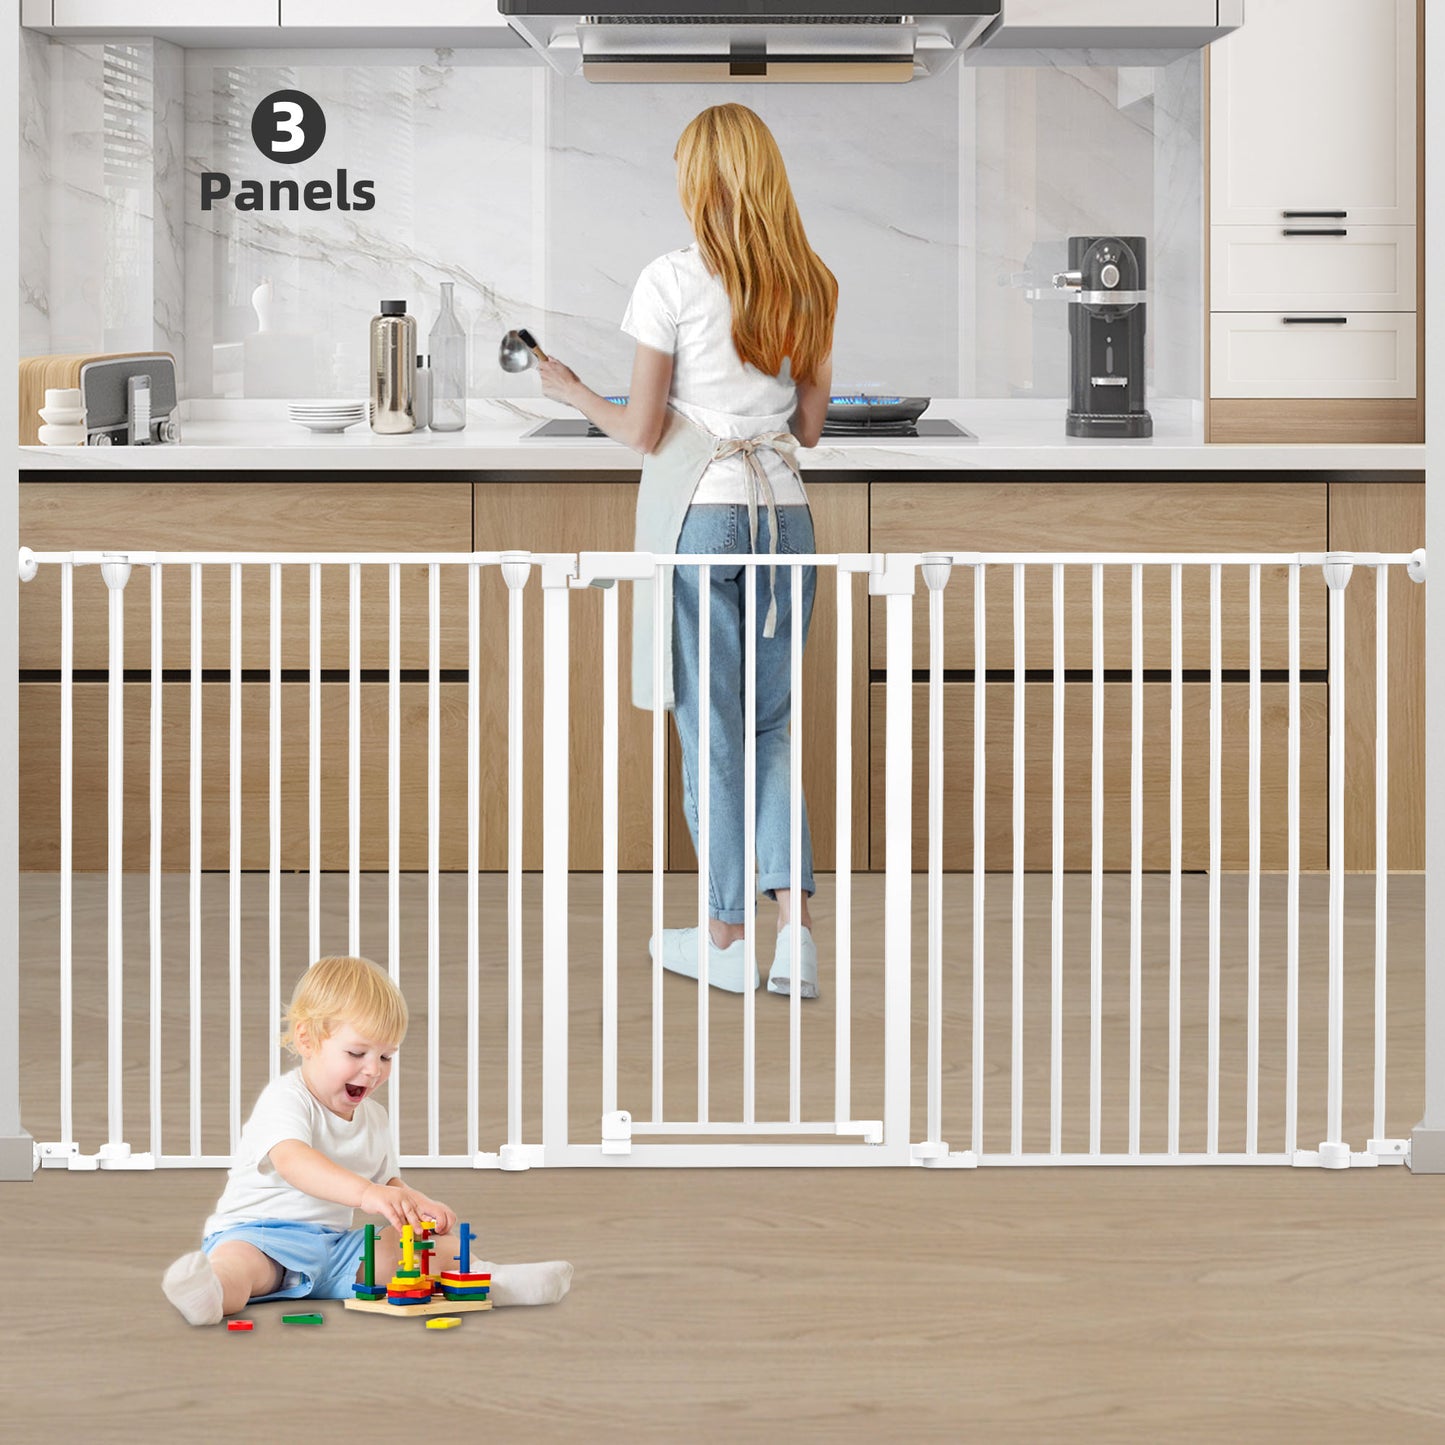 Wisairt Extra Wide Baby Gate for Doorways Stairs,35.5-79.6 Inch Walk Through Baby Safety Gate with Auto Close for Aged 6+ Months